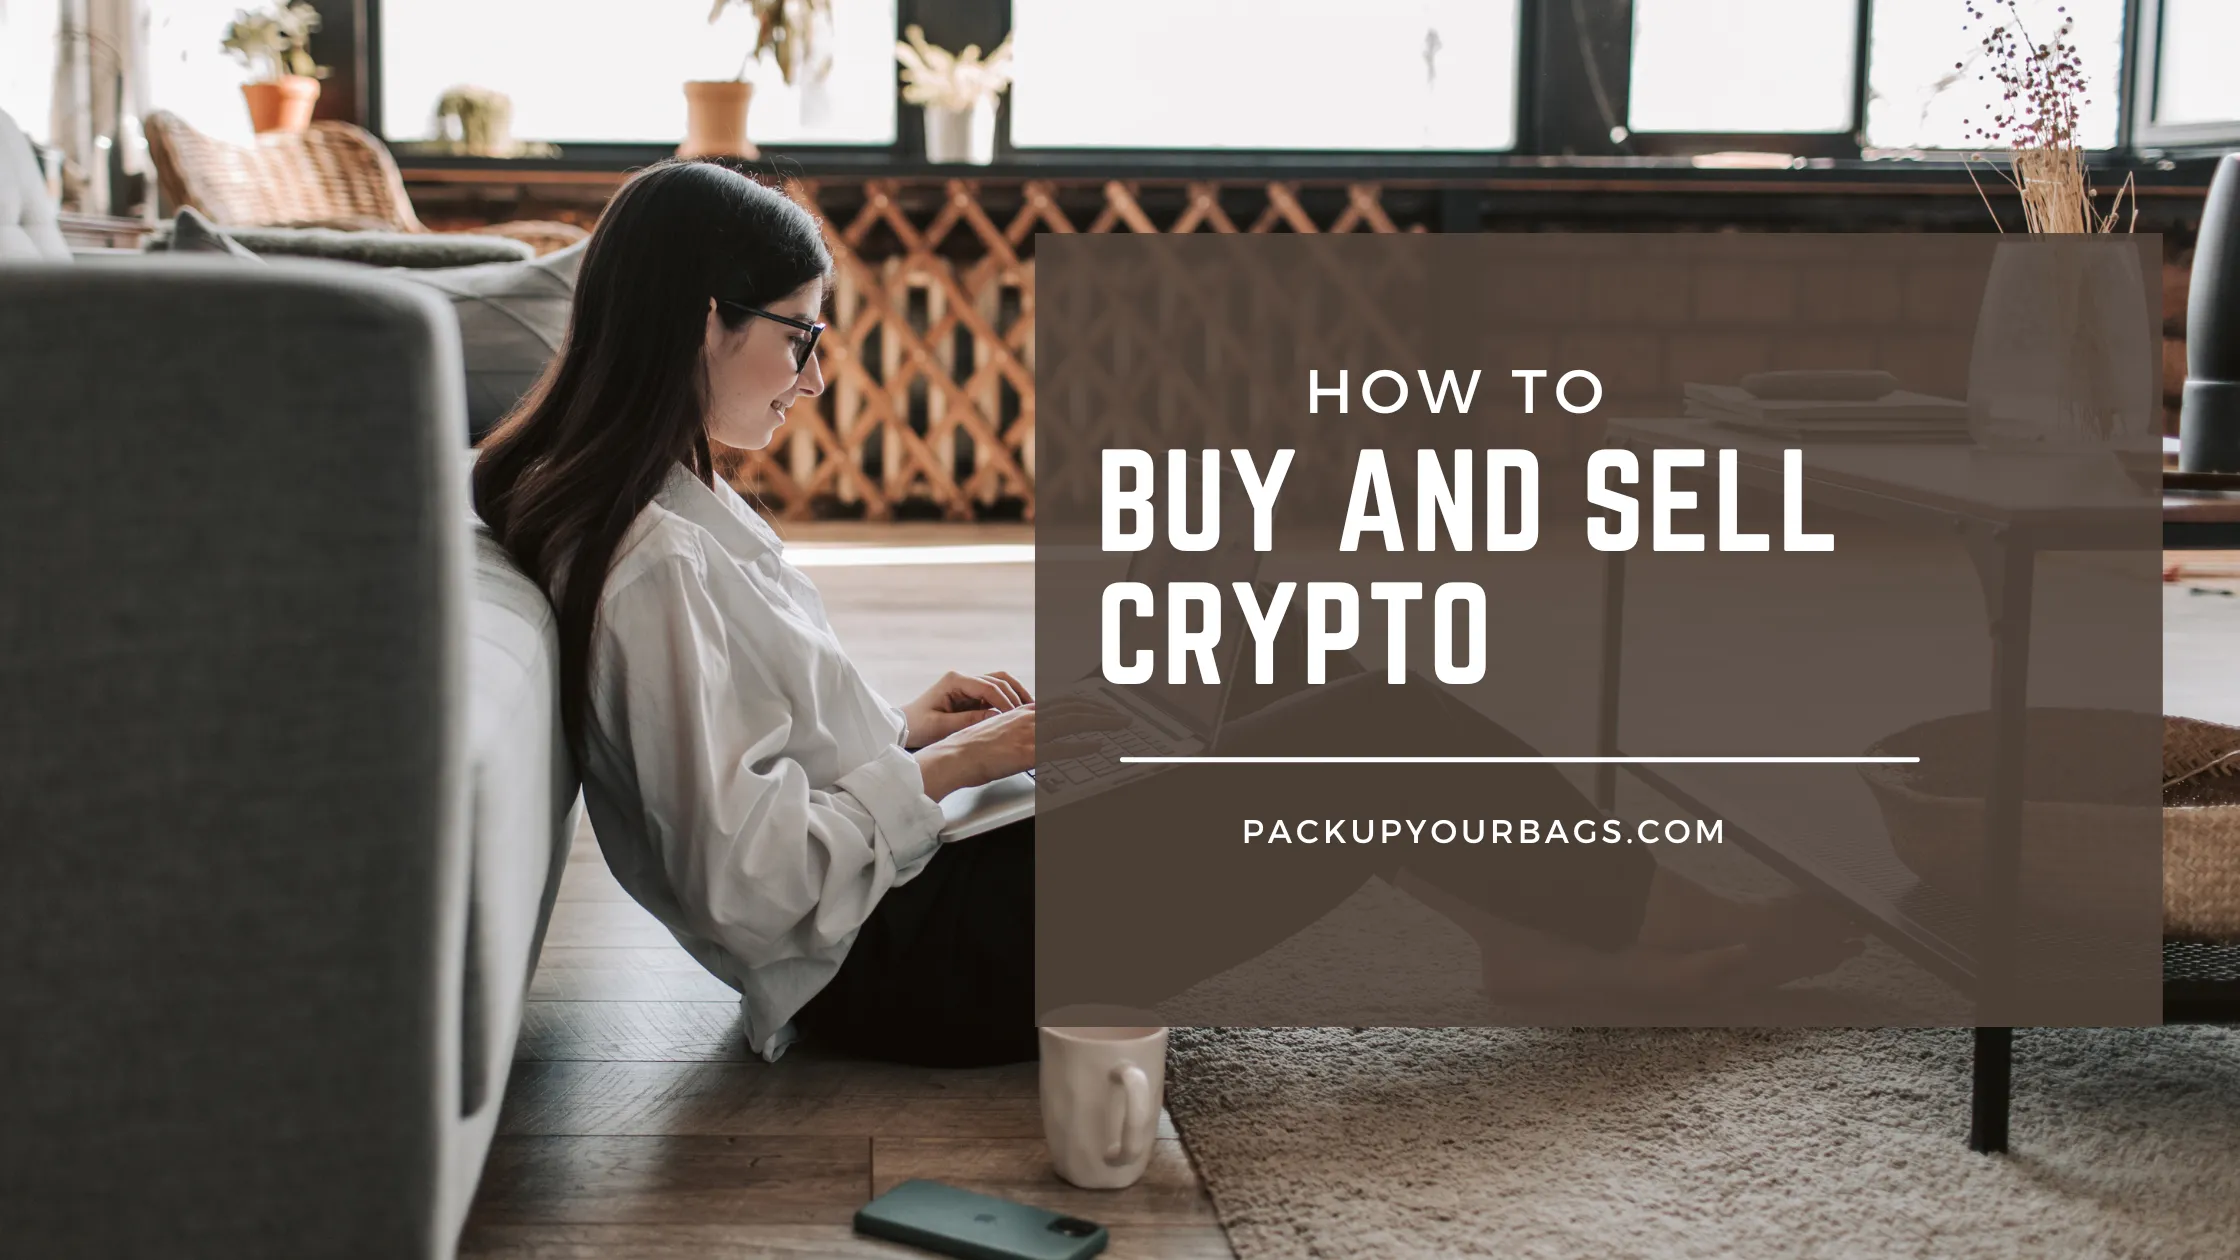 How to buy and sell crypto, exchanges, wallets, etc